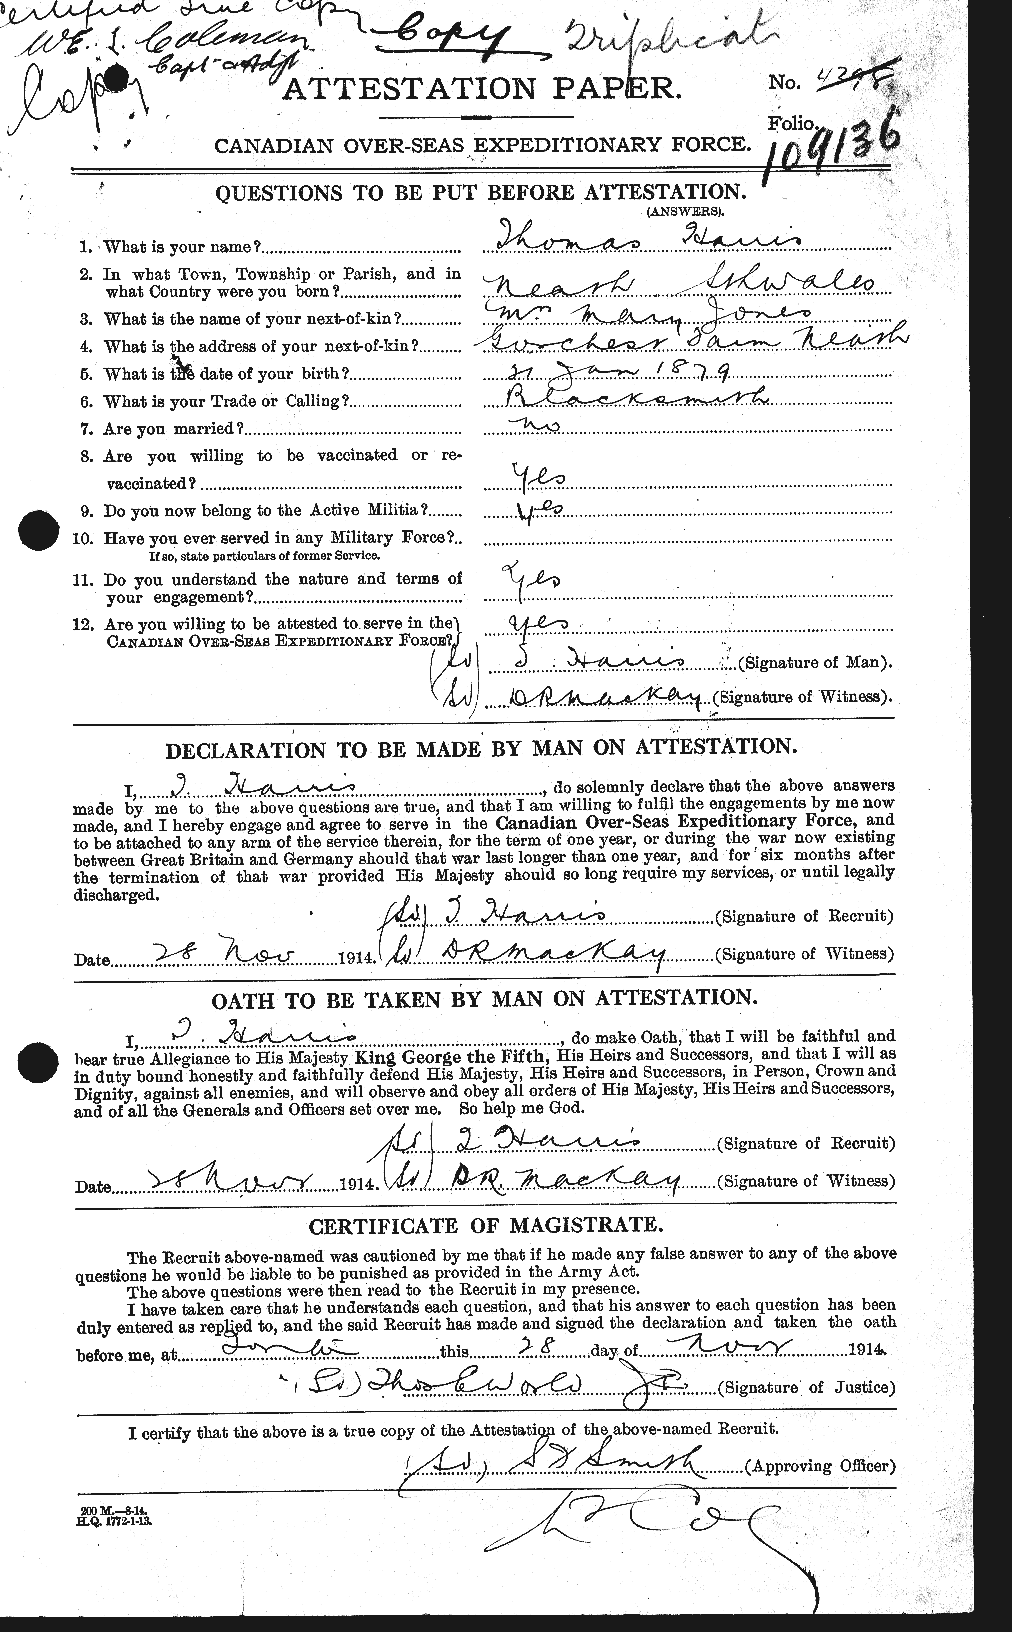 Personnel Records of the First World War - CEF 378233a